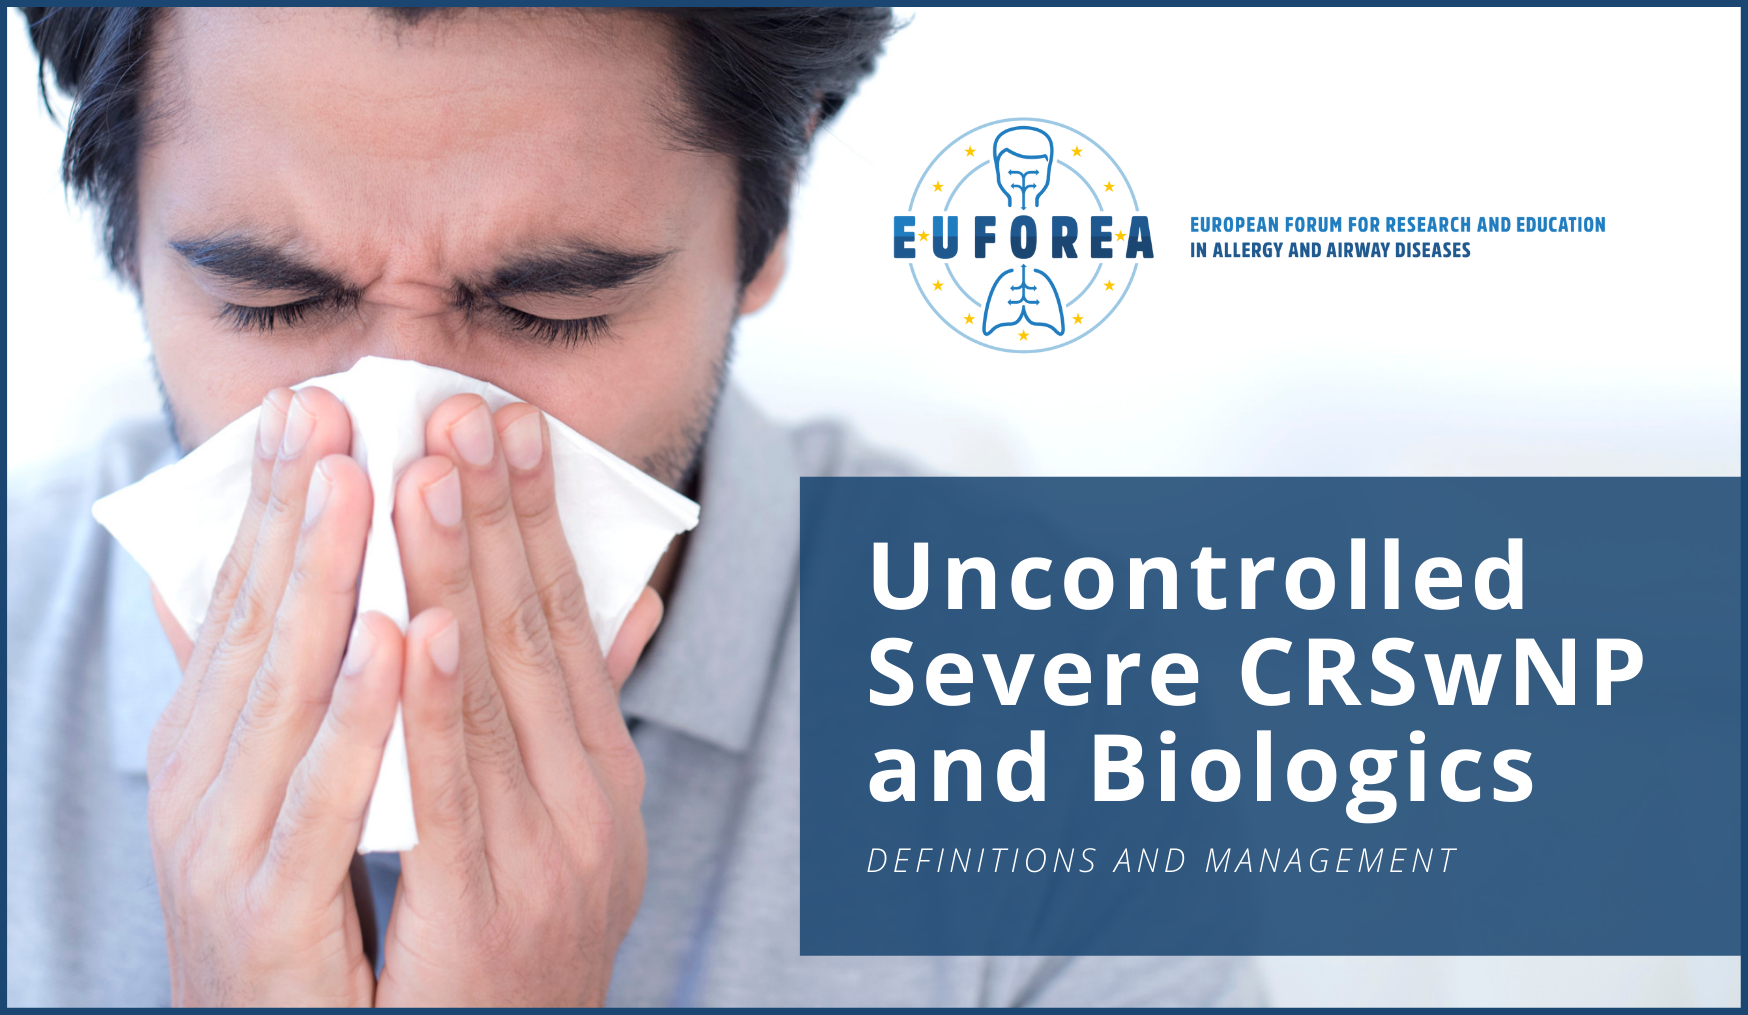 Uncontrolled Severe CRSwNP and Biologics